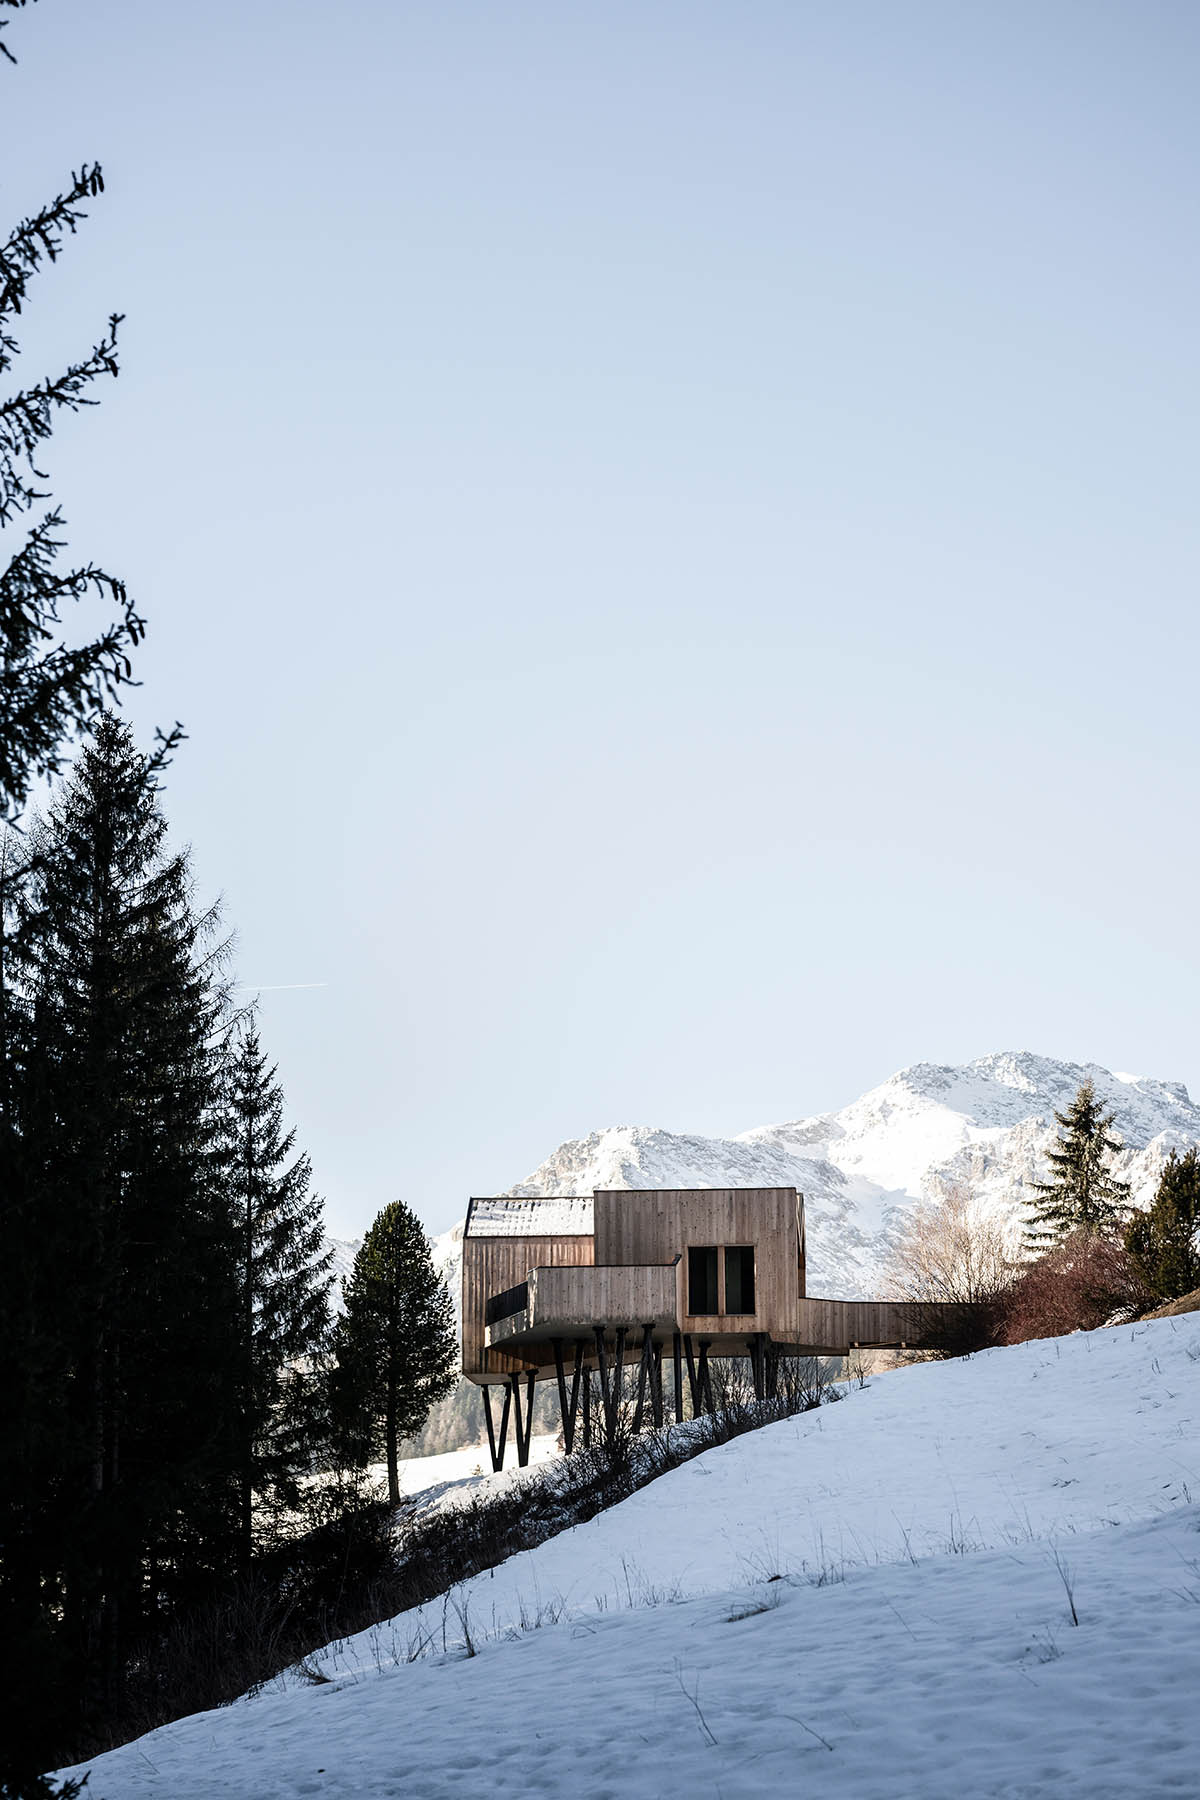 Zigzag roof defines character of Olympic Spa Hotel by NOA in the Alpine meadow